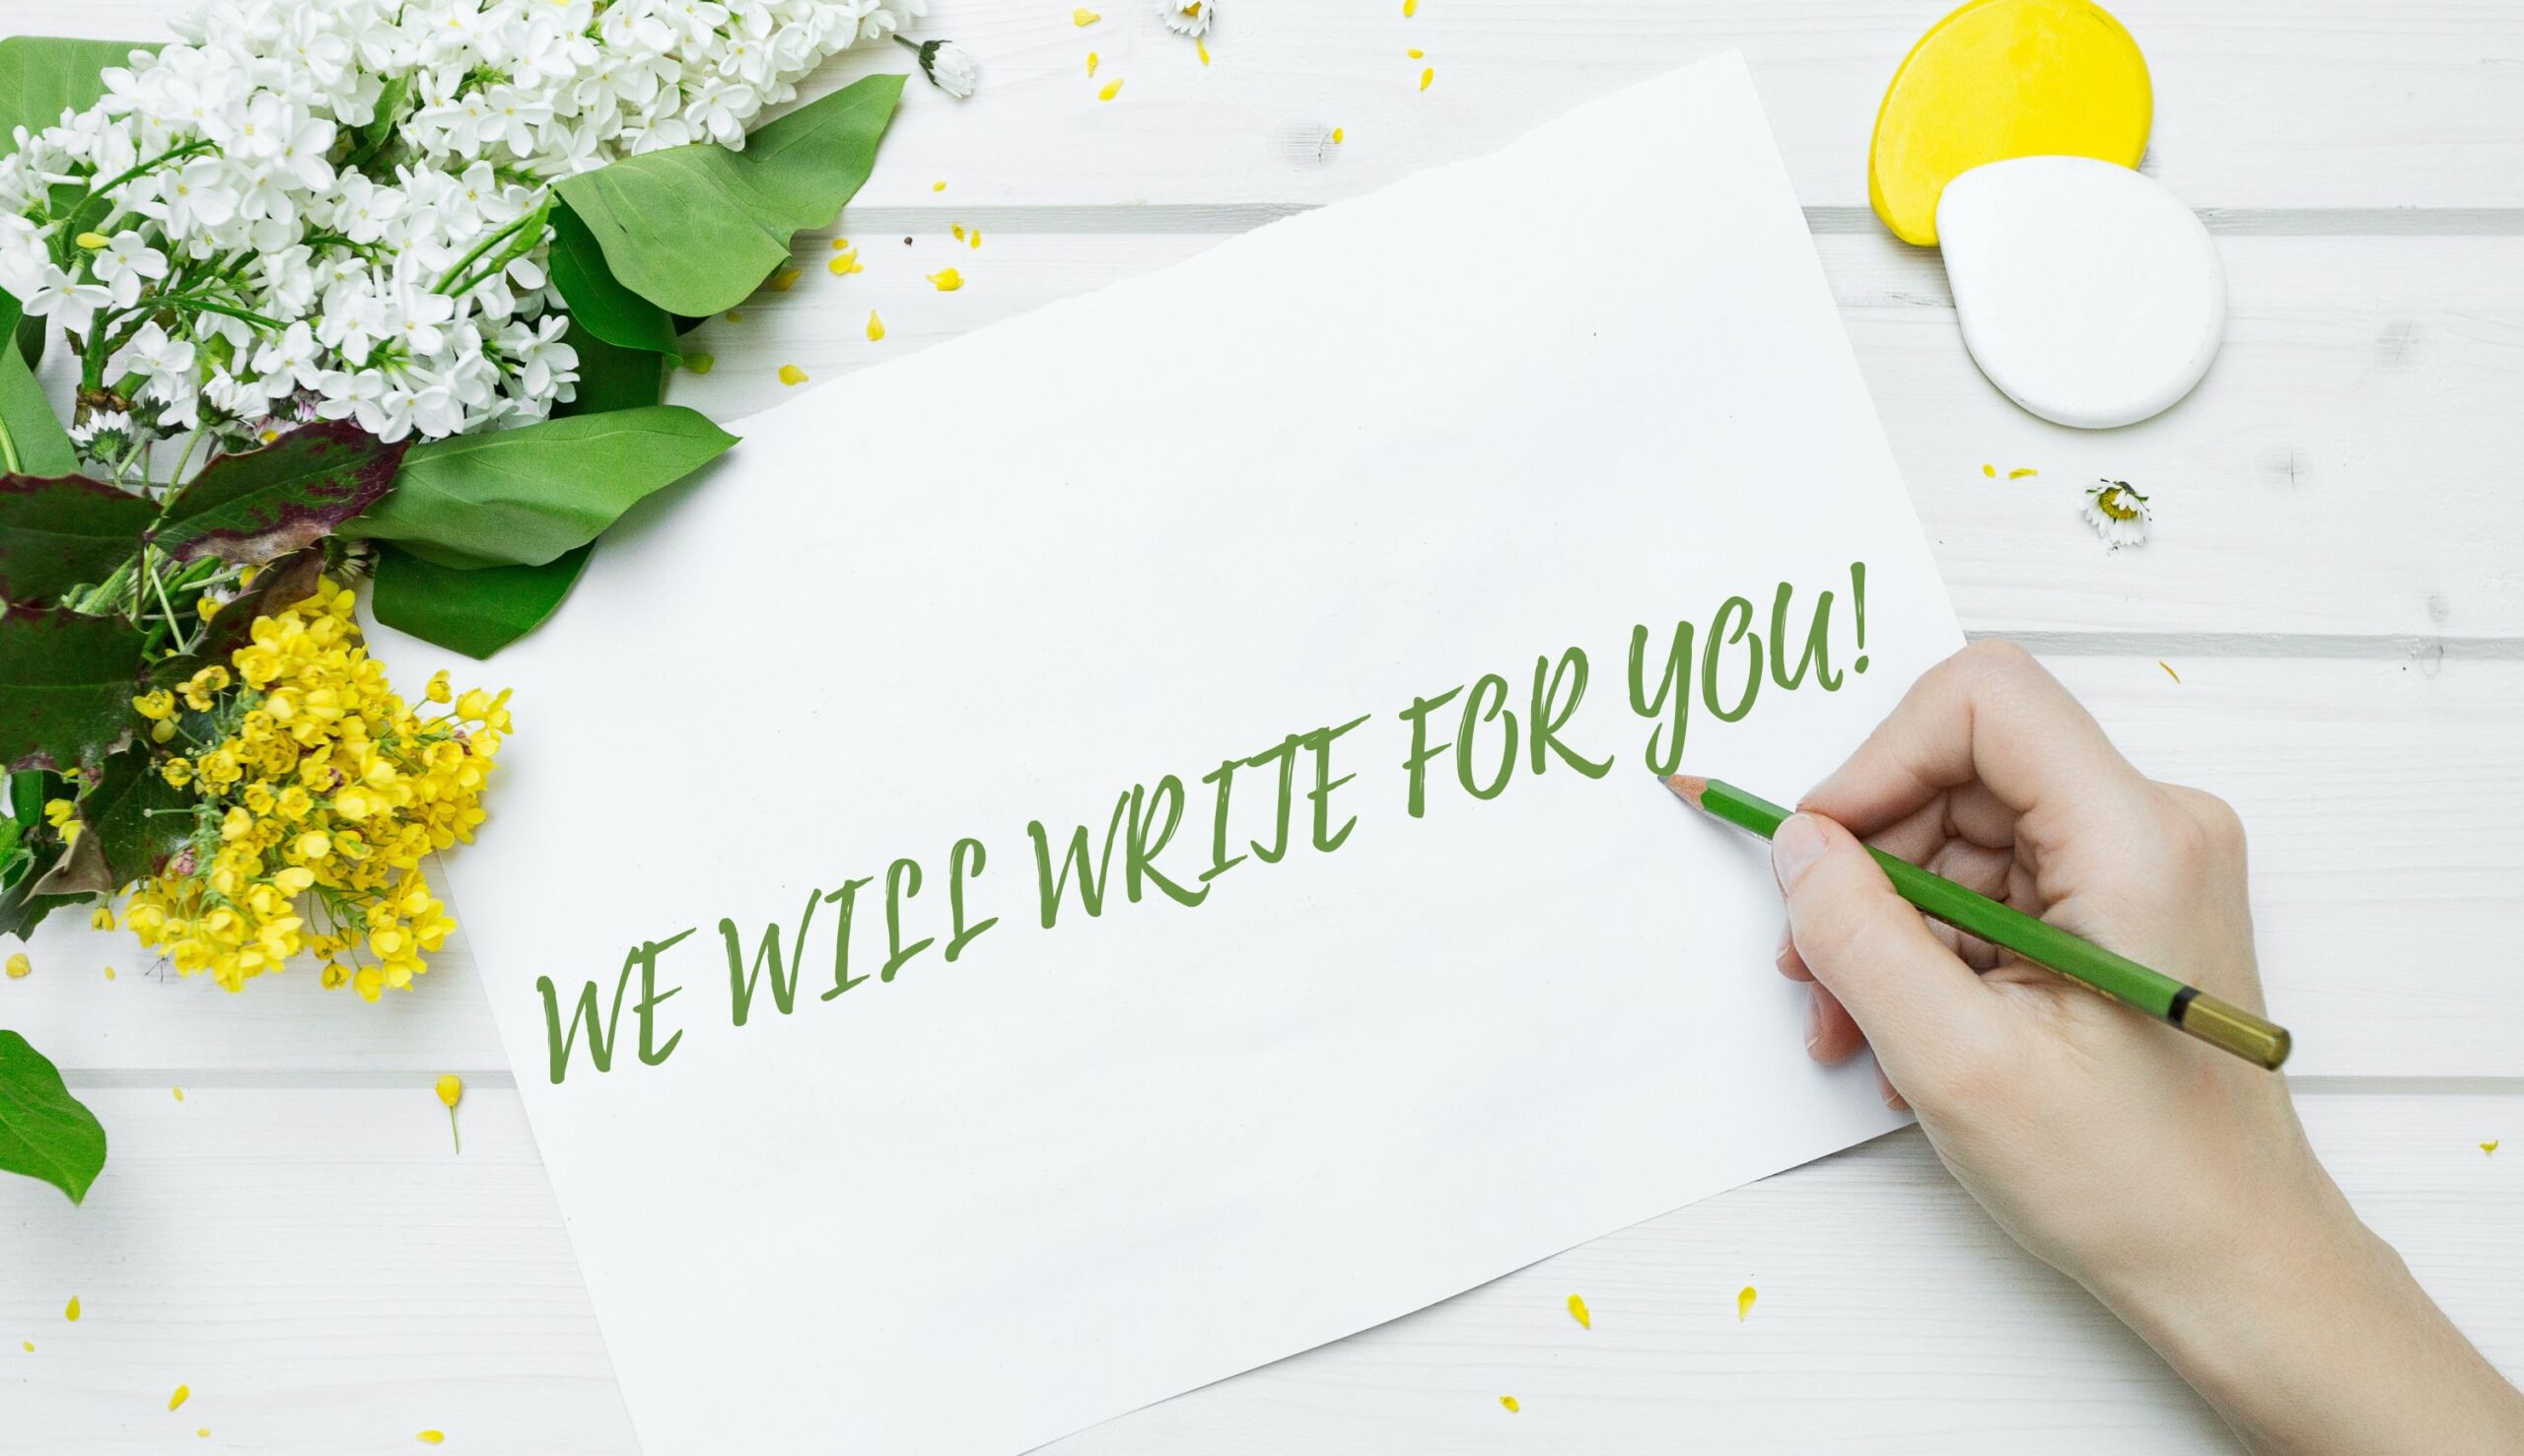 We will write for you